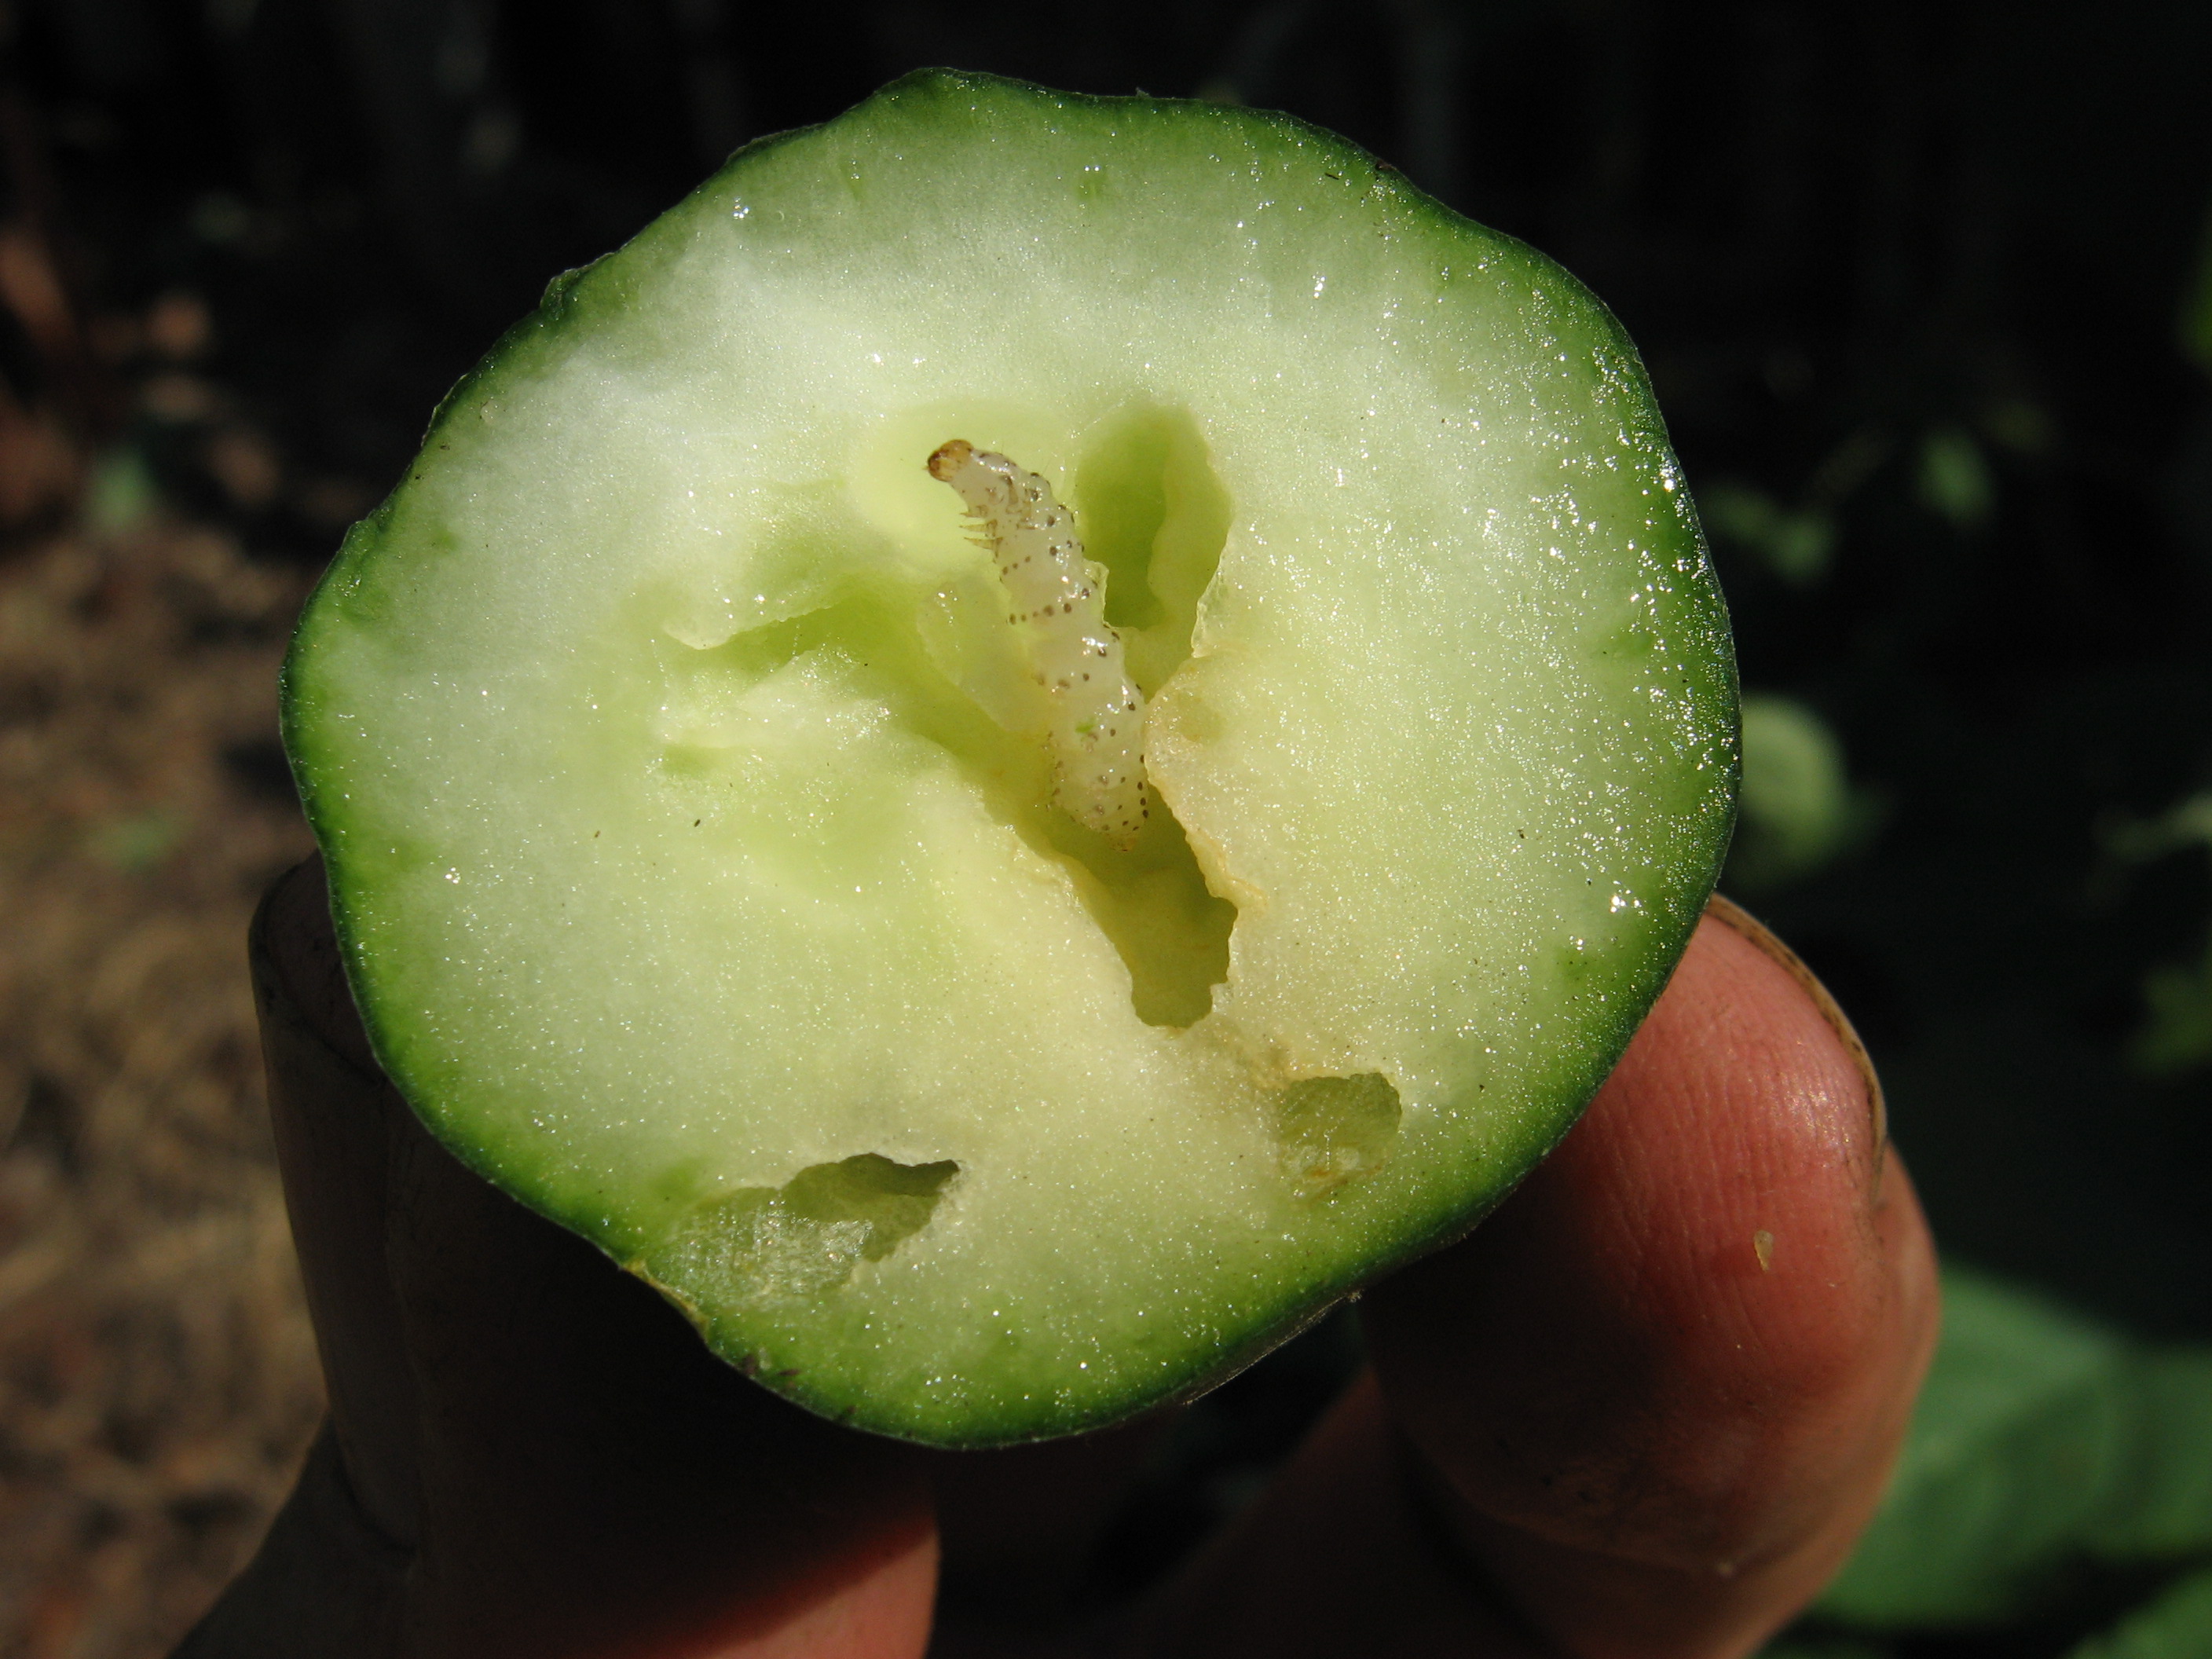 A pickleworm feasts on a cucumber. Some gardeners tolerate the damage and simply cut out the bad parts. (Courtesy Tom MacCubbin)